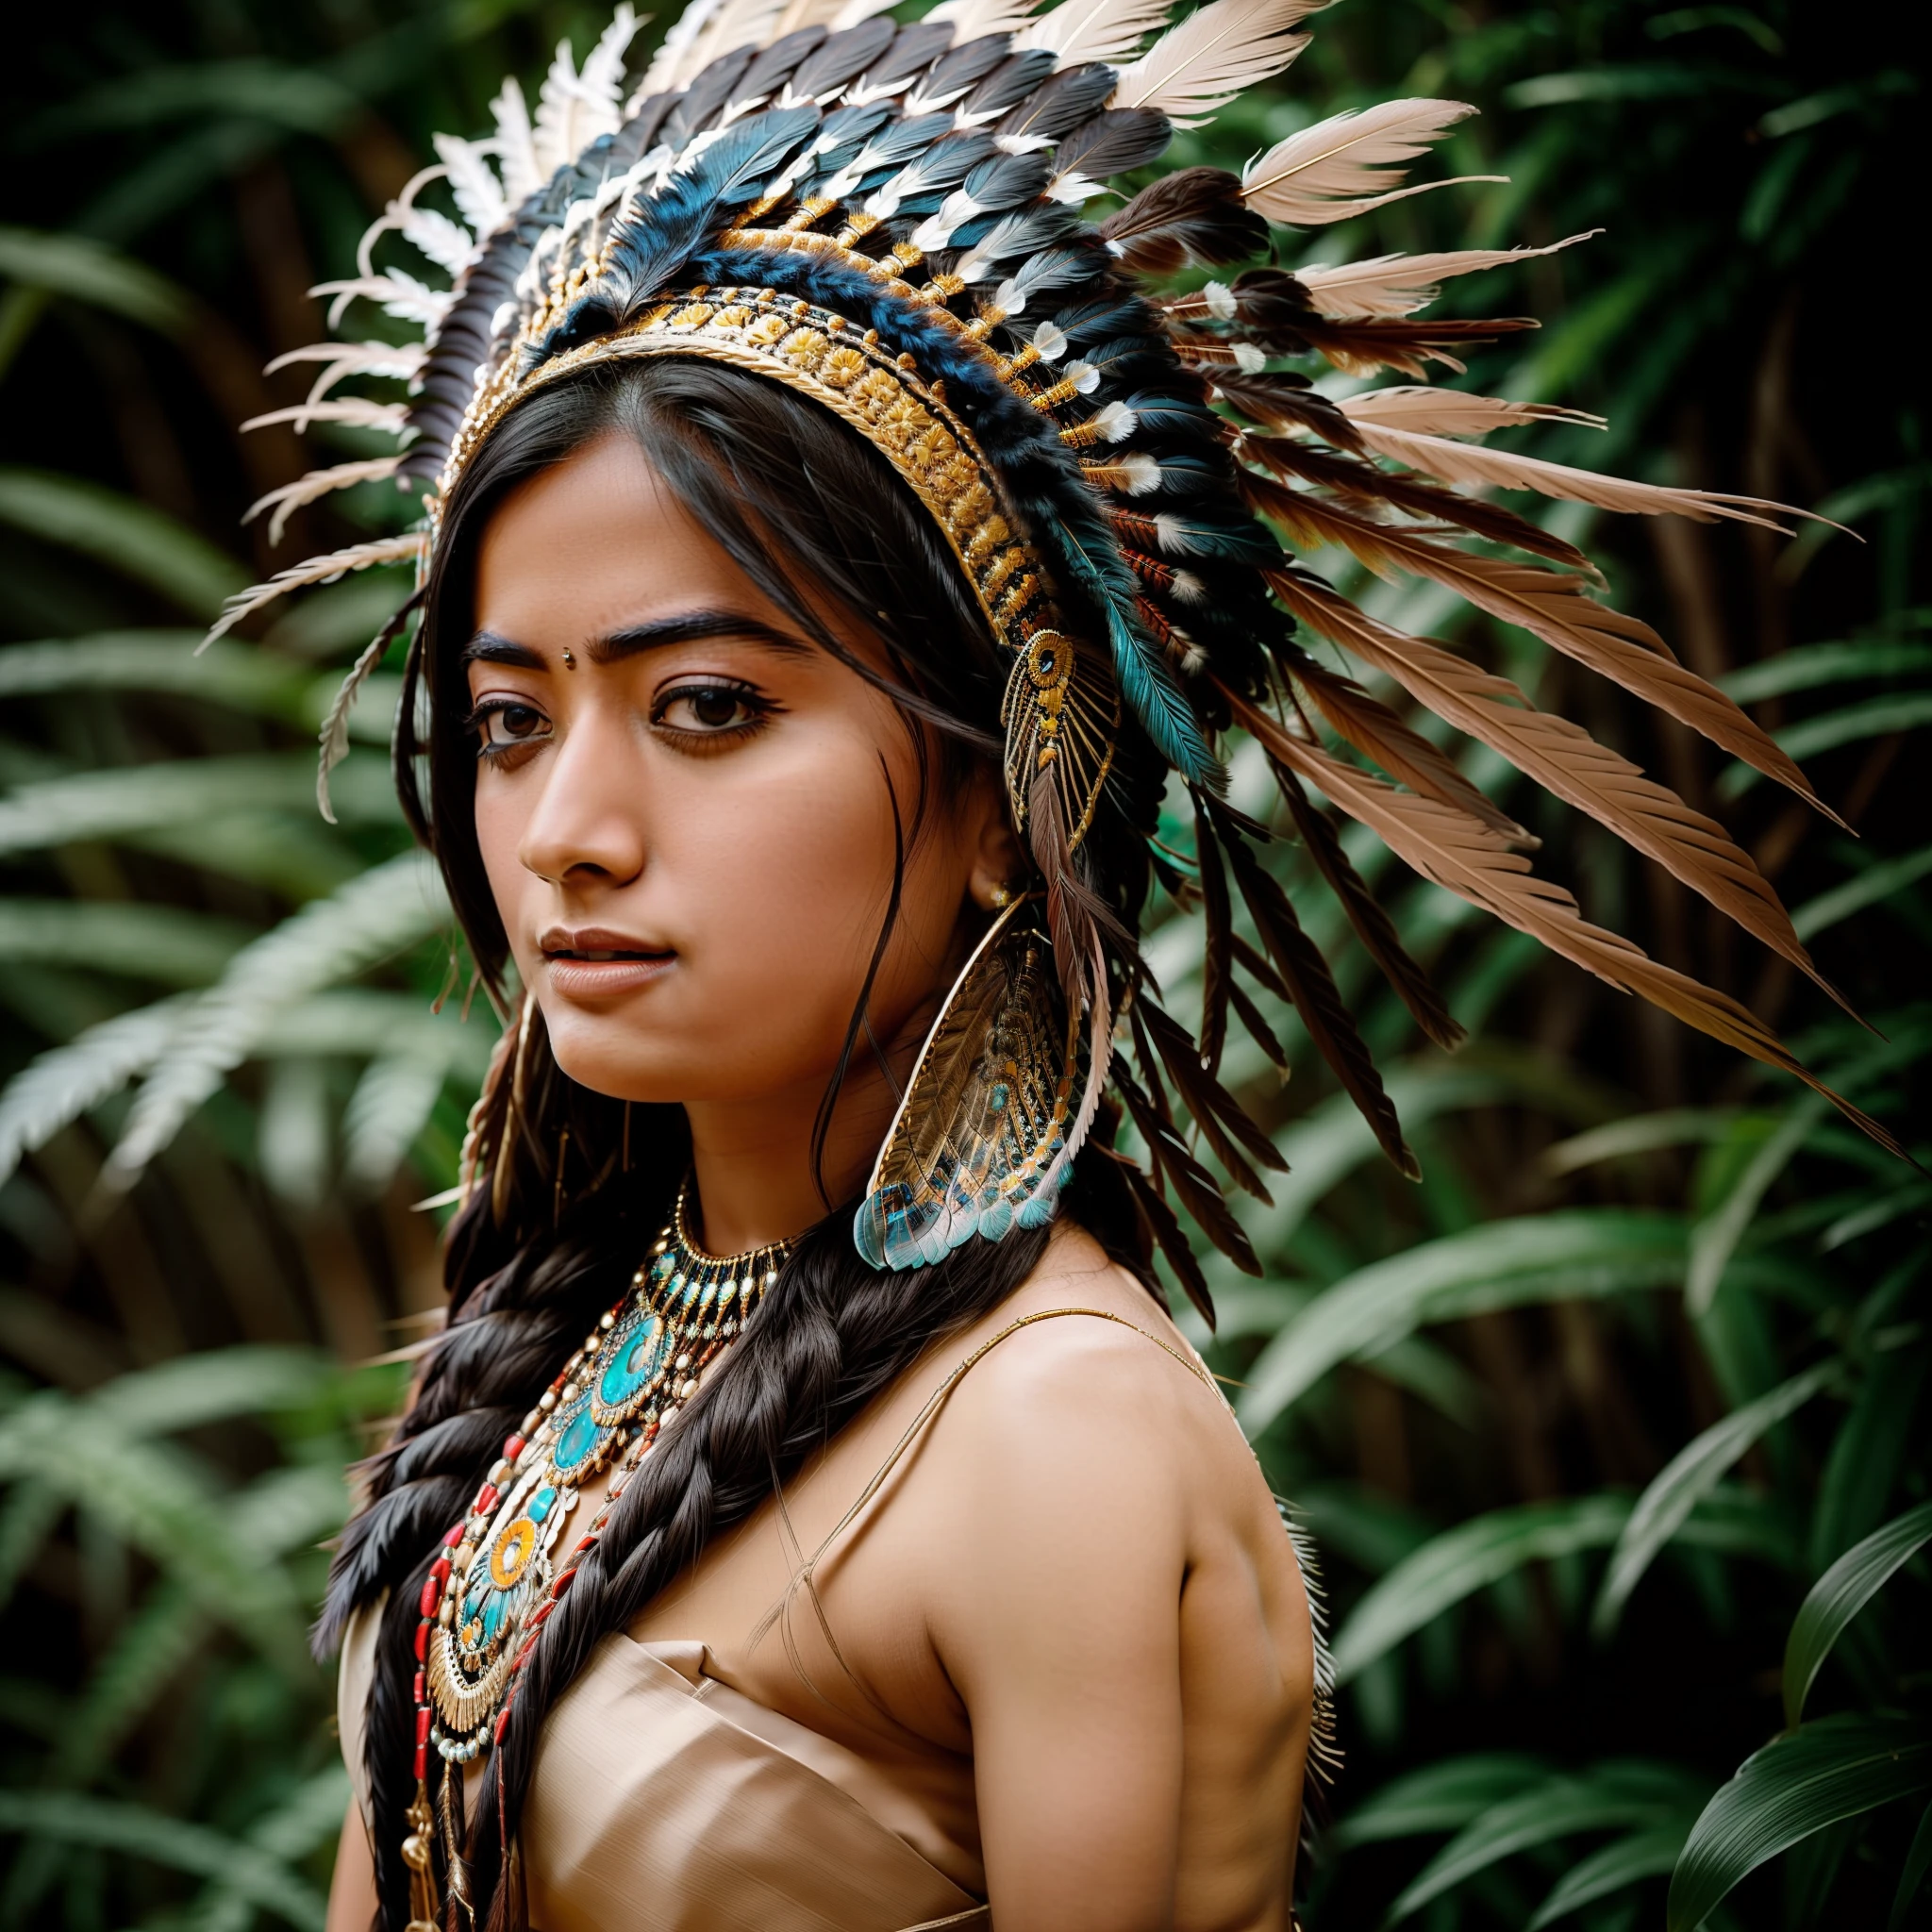 {{{cute rashmika}}} young woman wearing a feather headdress and a feather mask, she is naked, elaborate costume, feathered headdress, headdress, ornate headdress, centered headdress, native american, aztec princess portrait, beautiful costume, indian warrior, native american warrior, american indian headdress, : native american shamen fantasy, wearing crown of bright feathers